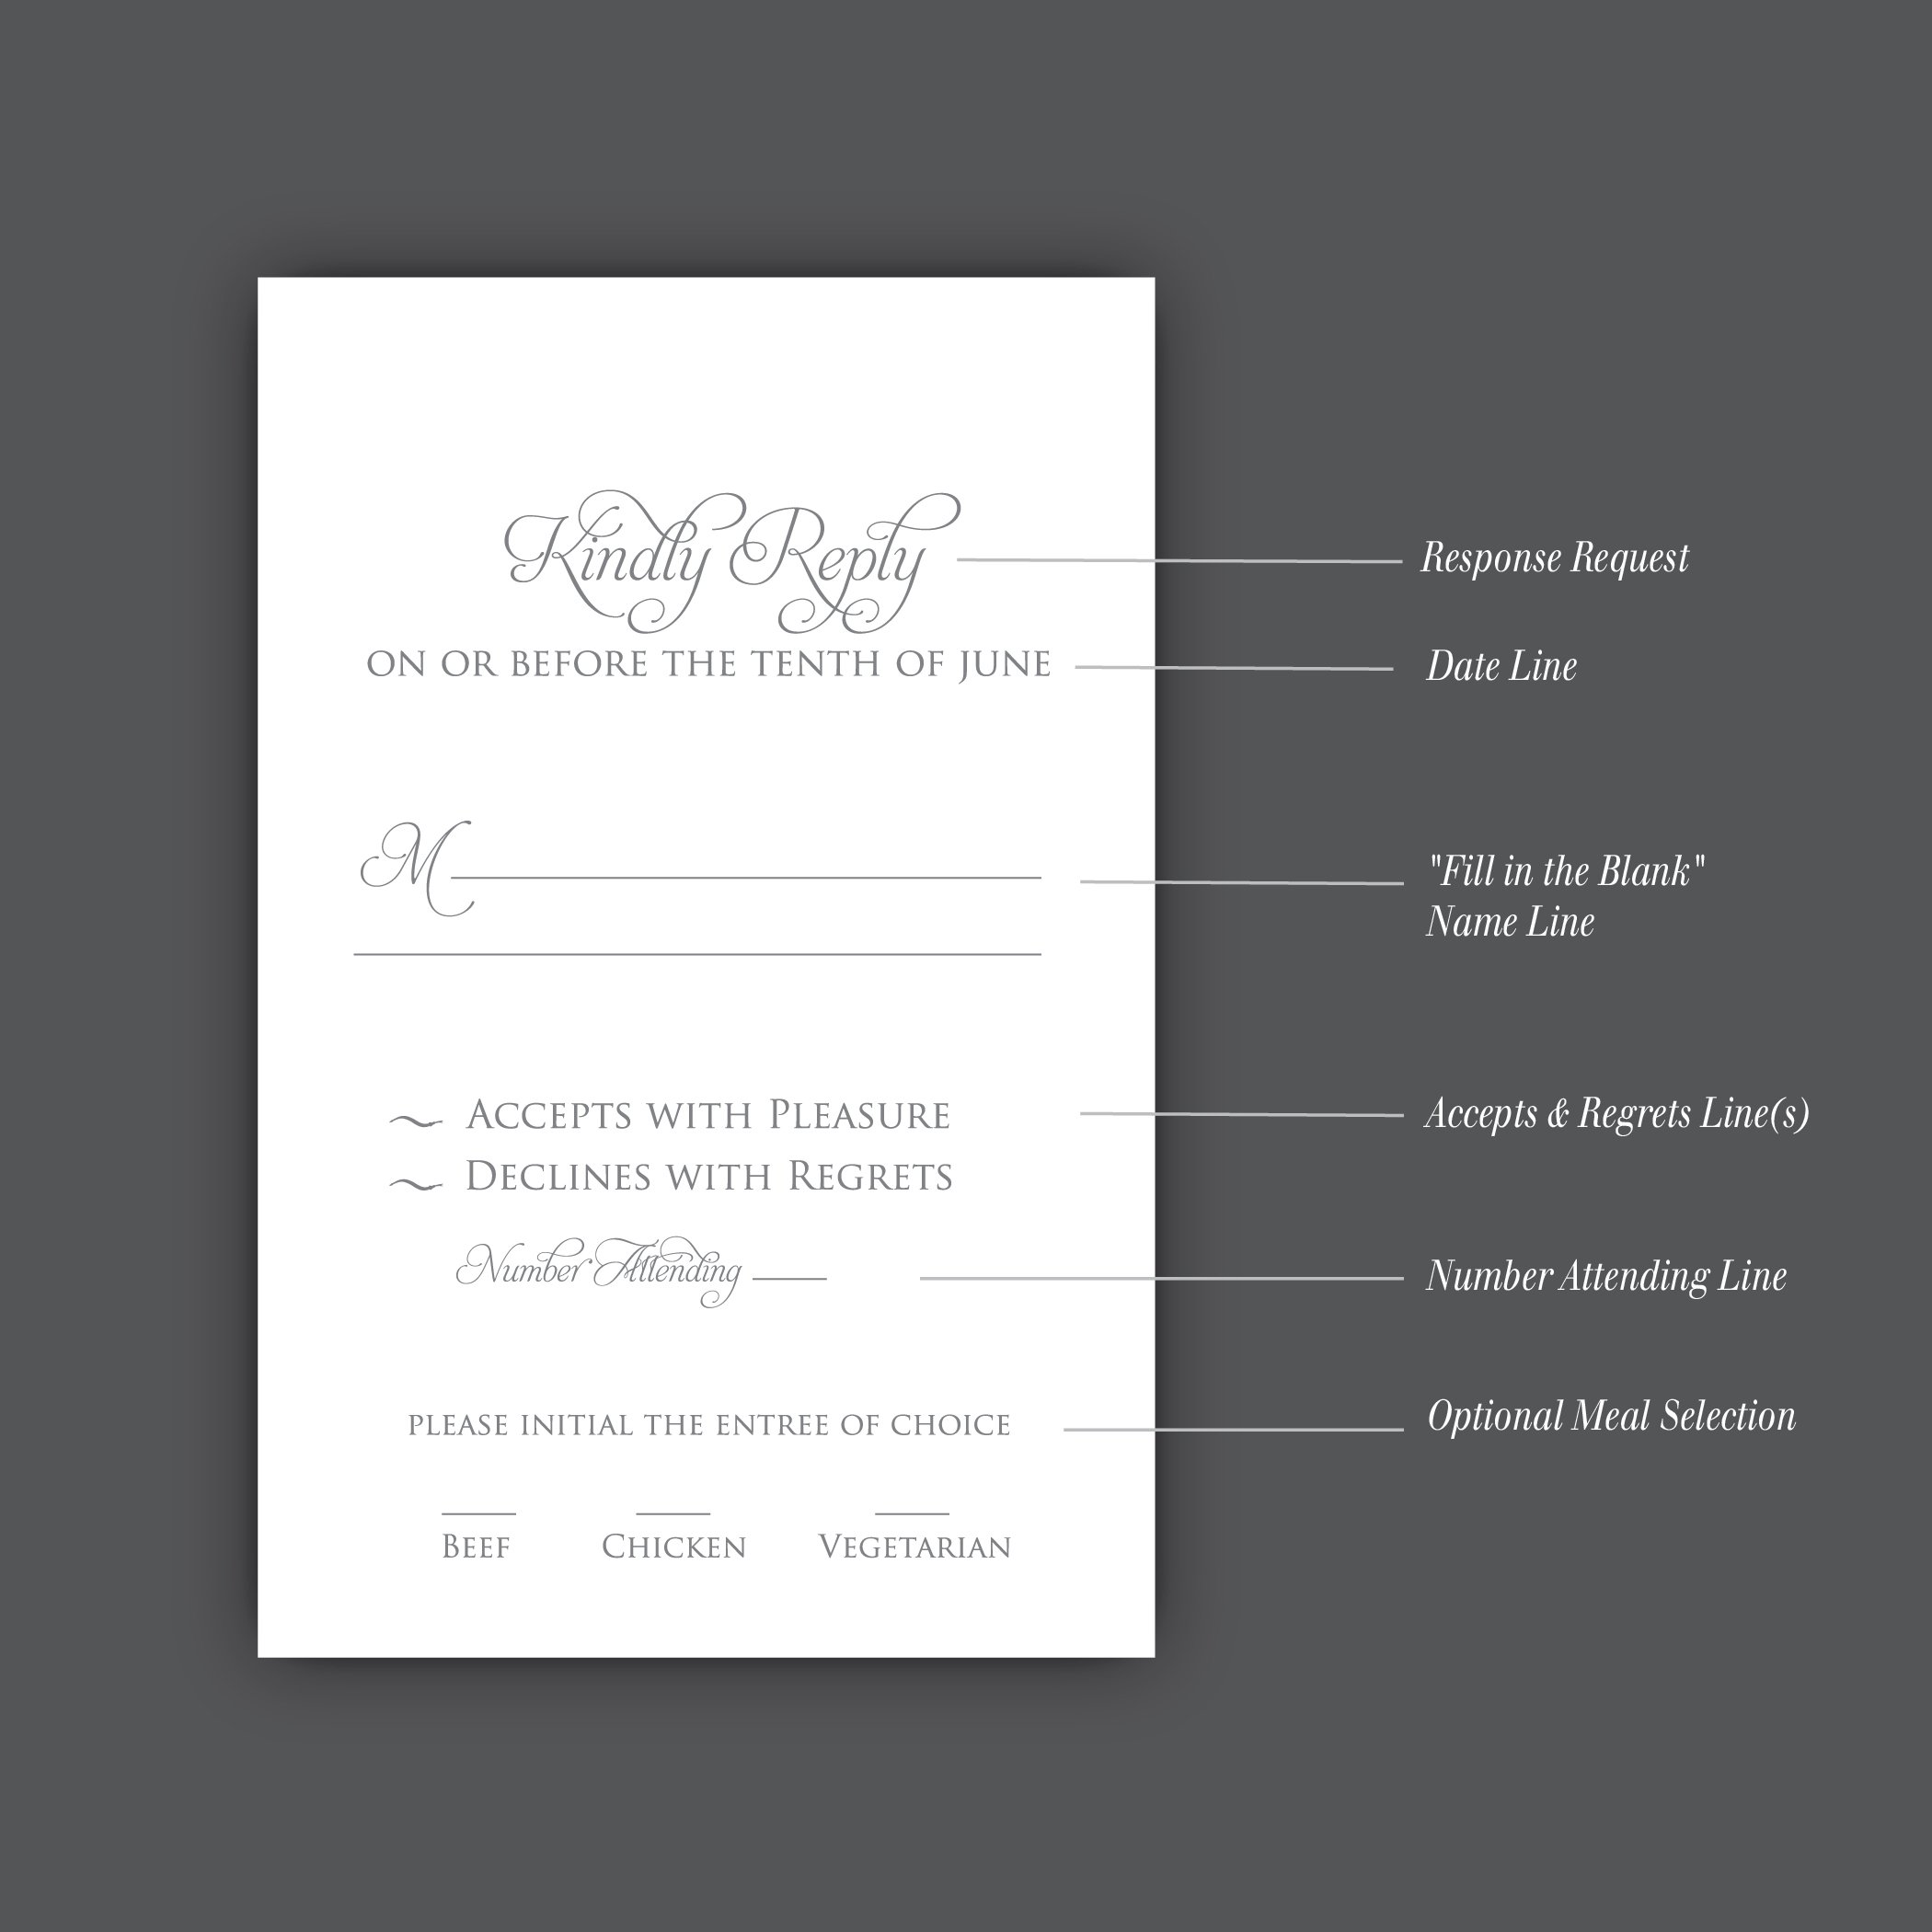 Wedding Invitation Rsvp How To Fill Out